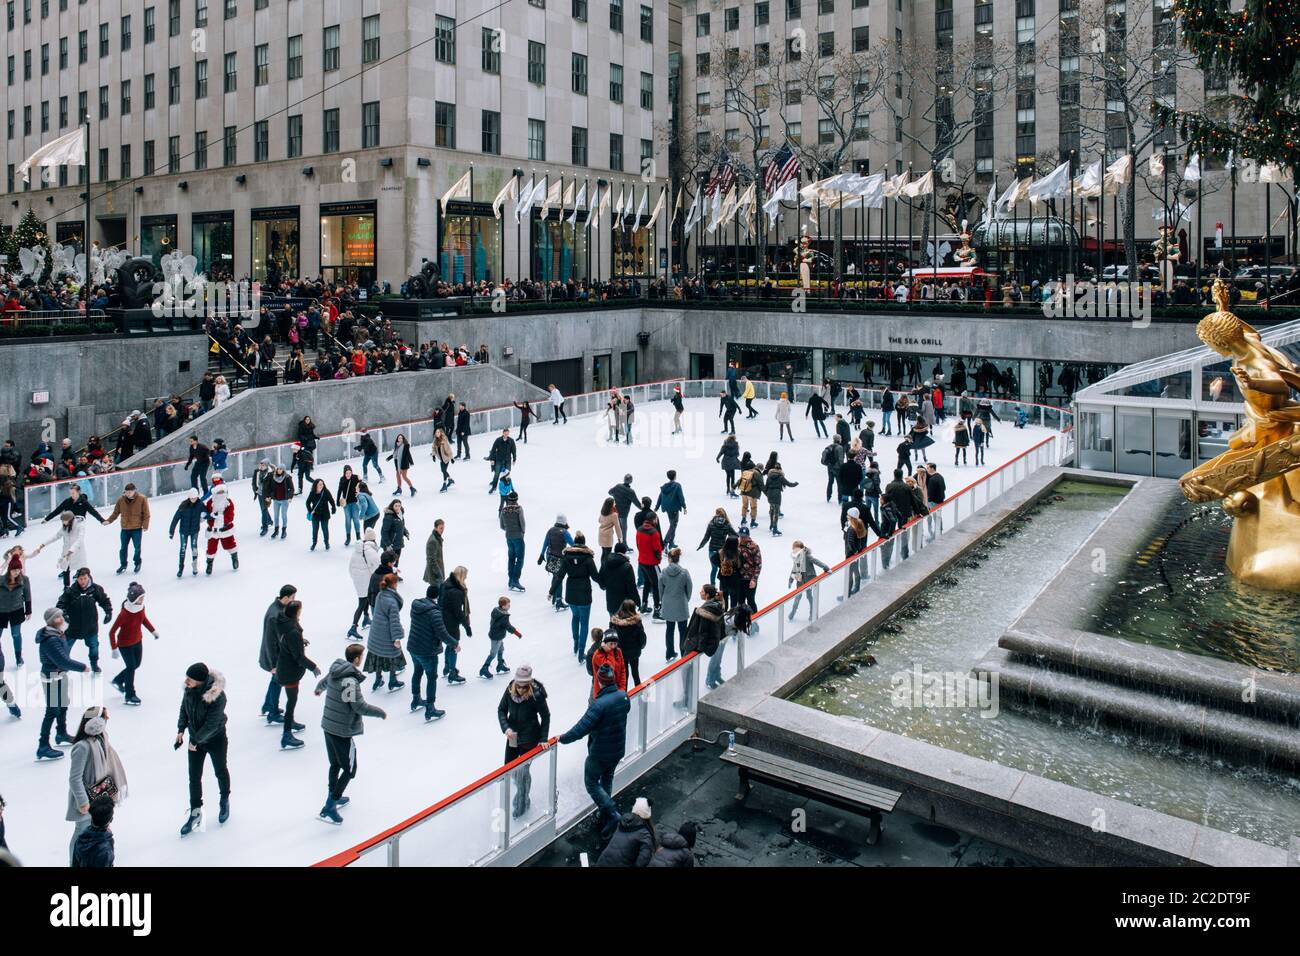 Seasonal ice skating rink with a golden statue, in a famed complex with upscale shops  restaurants in Rockefeller Center  Midtow Stock Photo